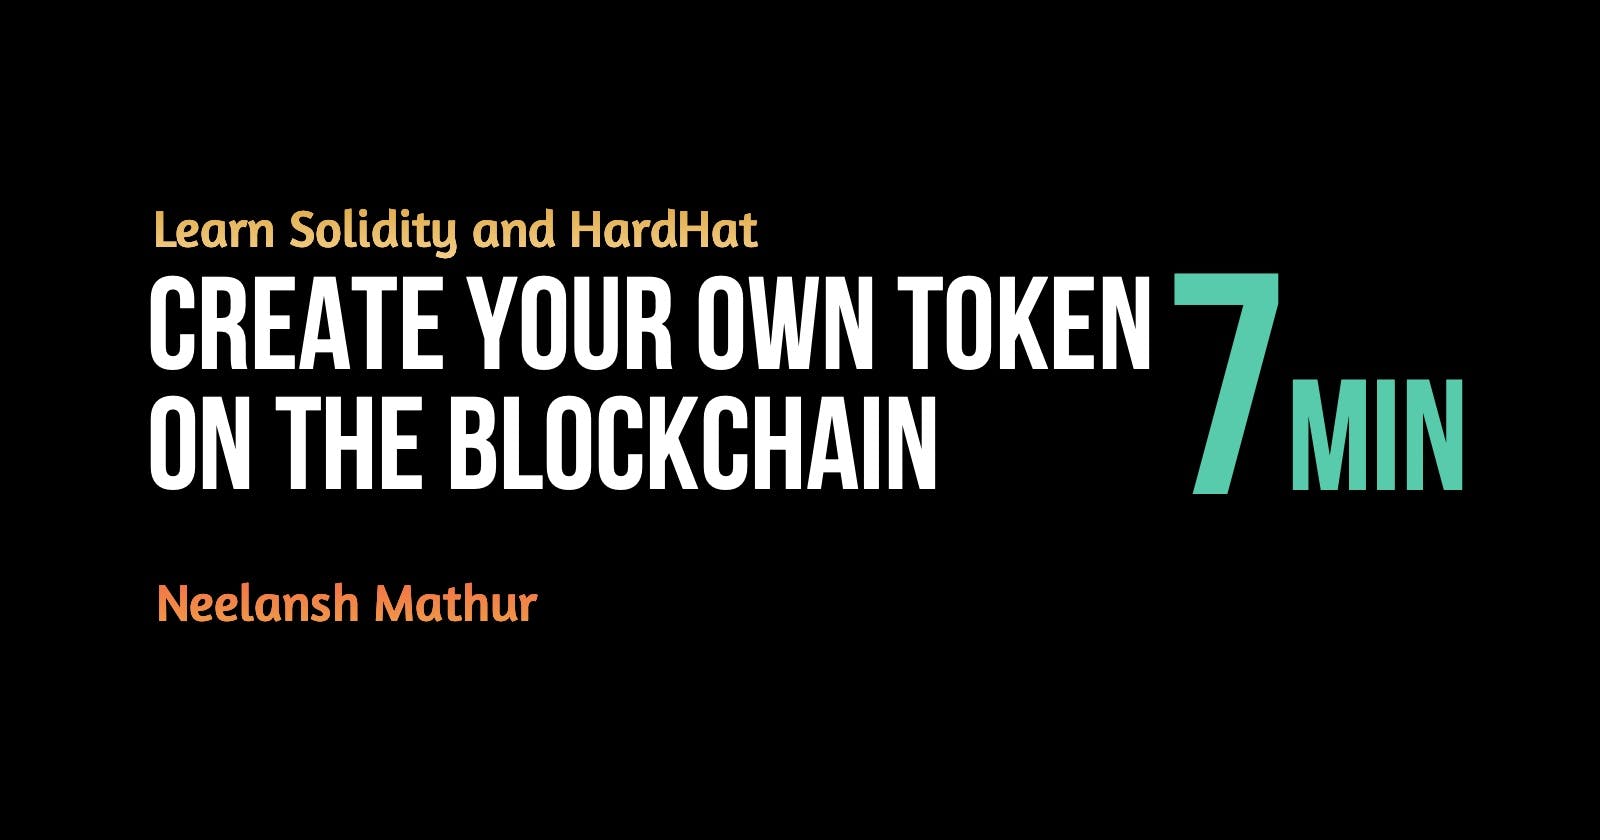 How to Create your own Token on the Ethereum Blockchain